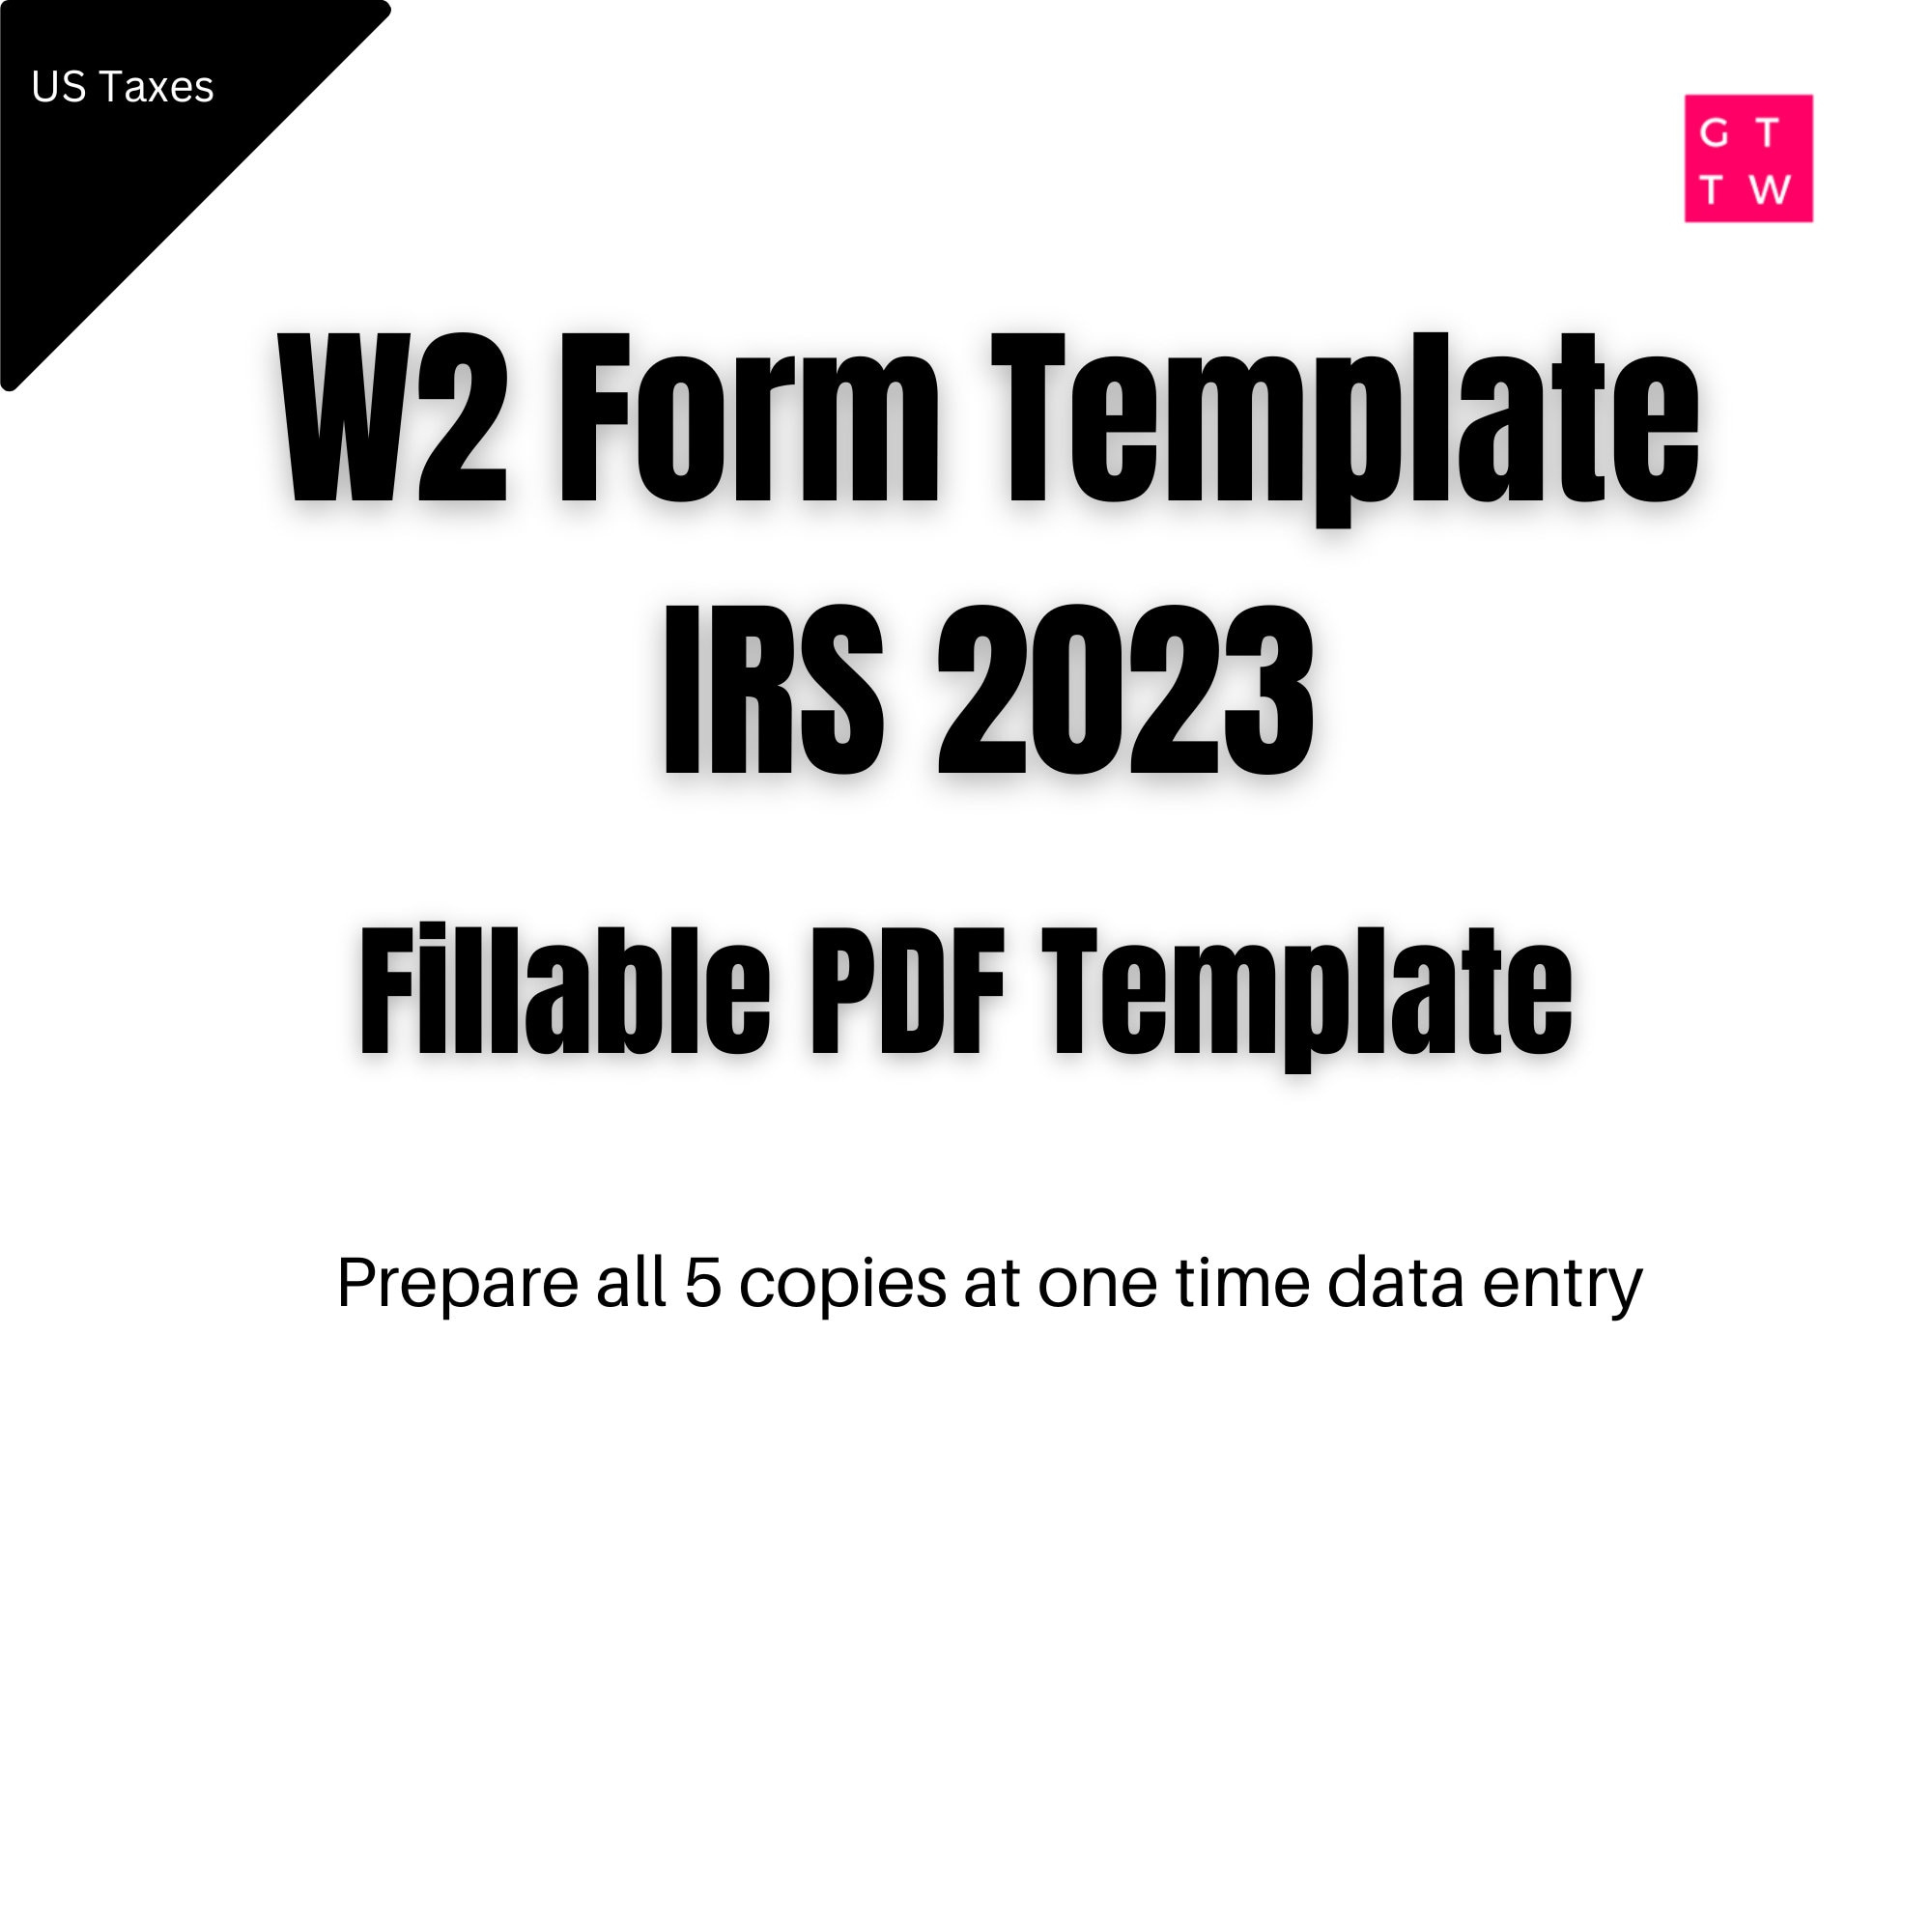 W2 Form Irs 2024/2023 Fillable Pdf | With Print And Clear Buttons | Generate W2 Quickly| Digital Download throughout W2 Form 2023 Pdf California